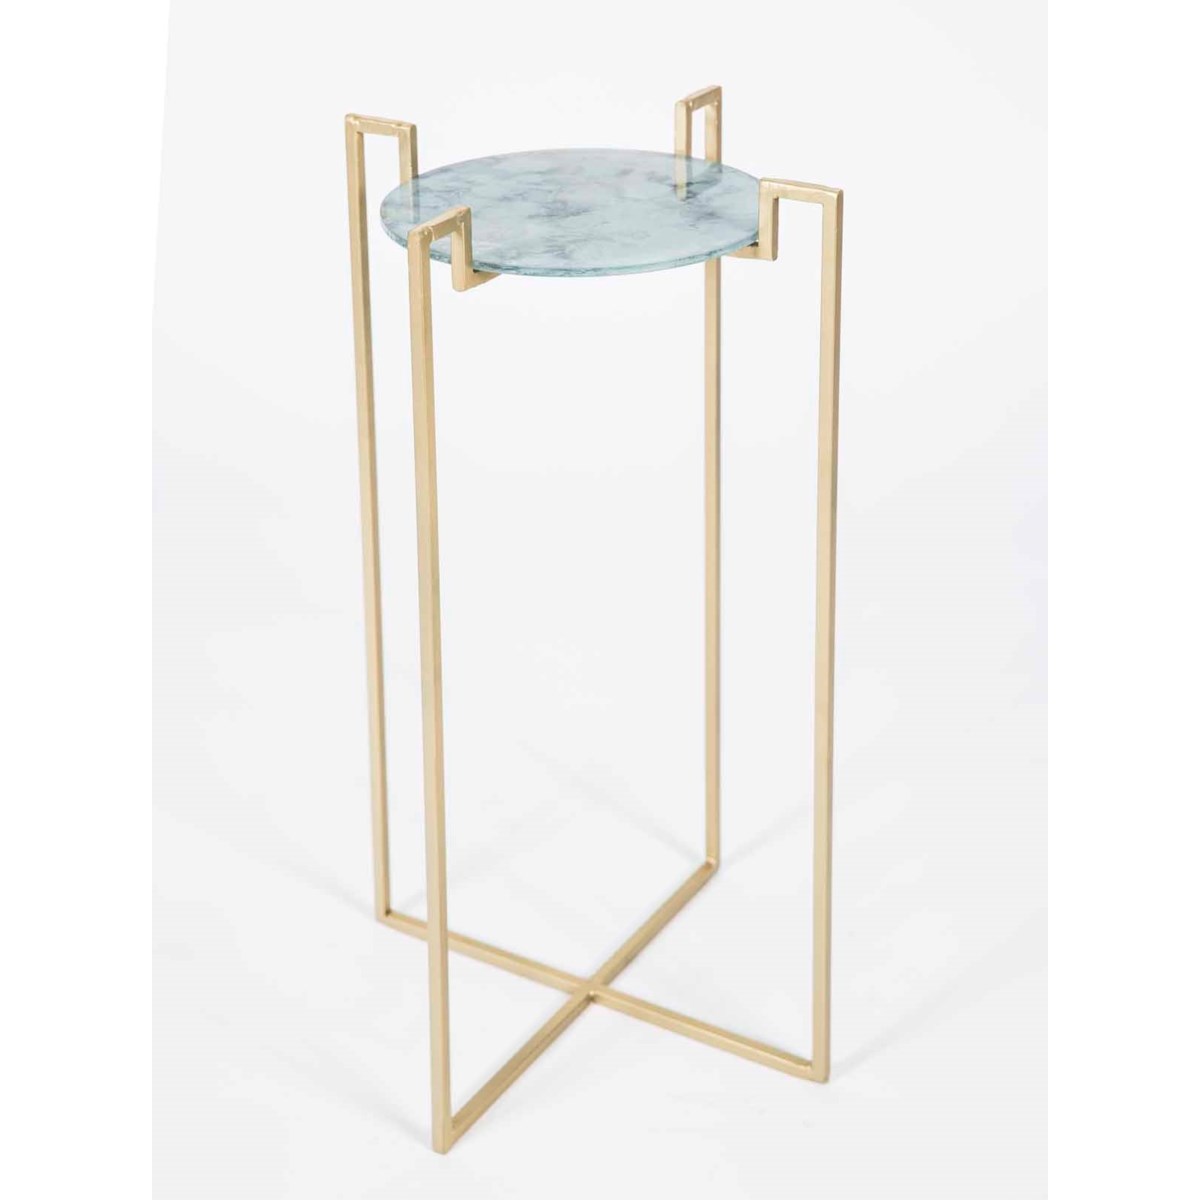 Dora Accent Table in Gold with Glass Shelf in Cathedral Stone Finish